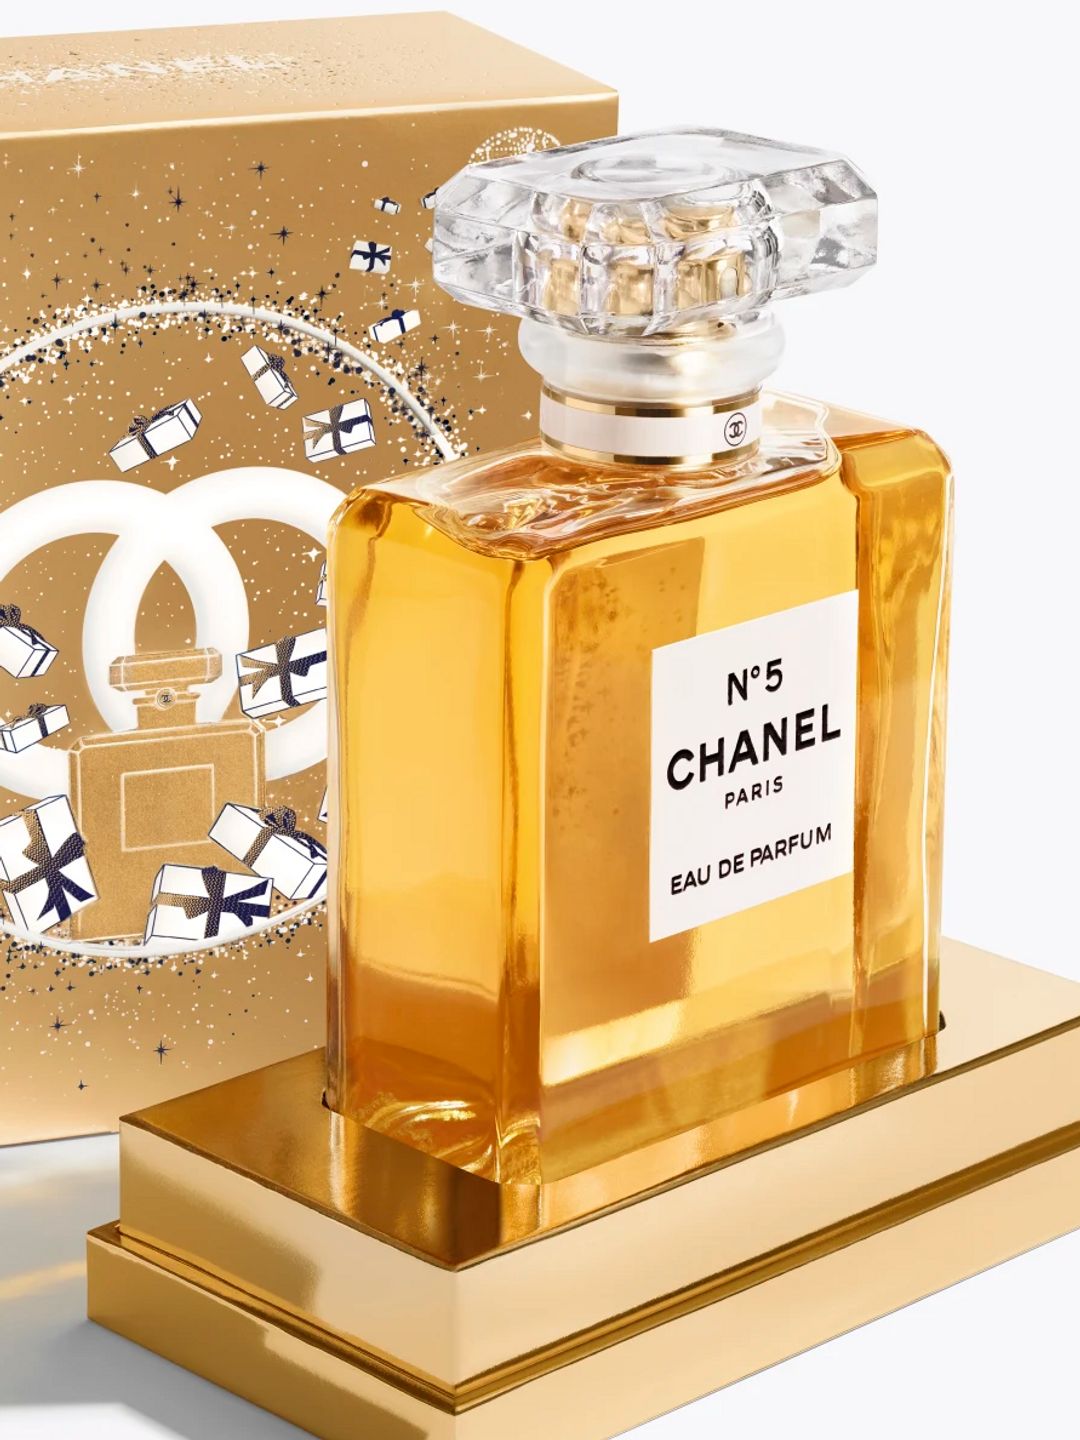 This limited-edition gold and white case, opens to reveal N°5 Eau de Parfum